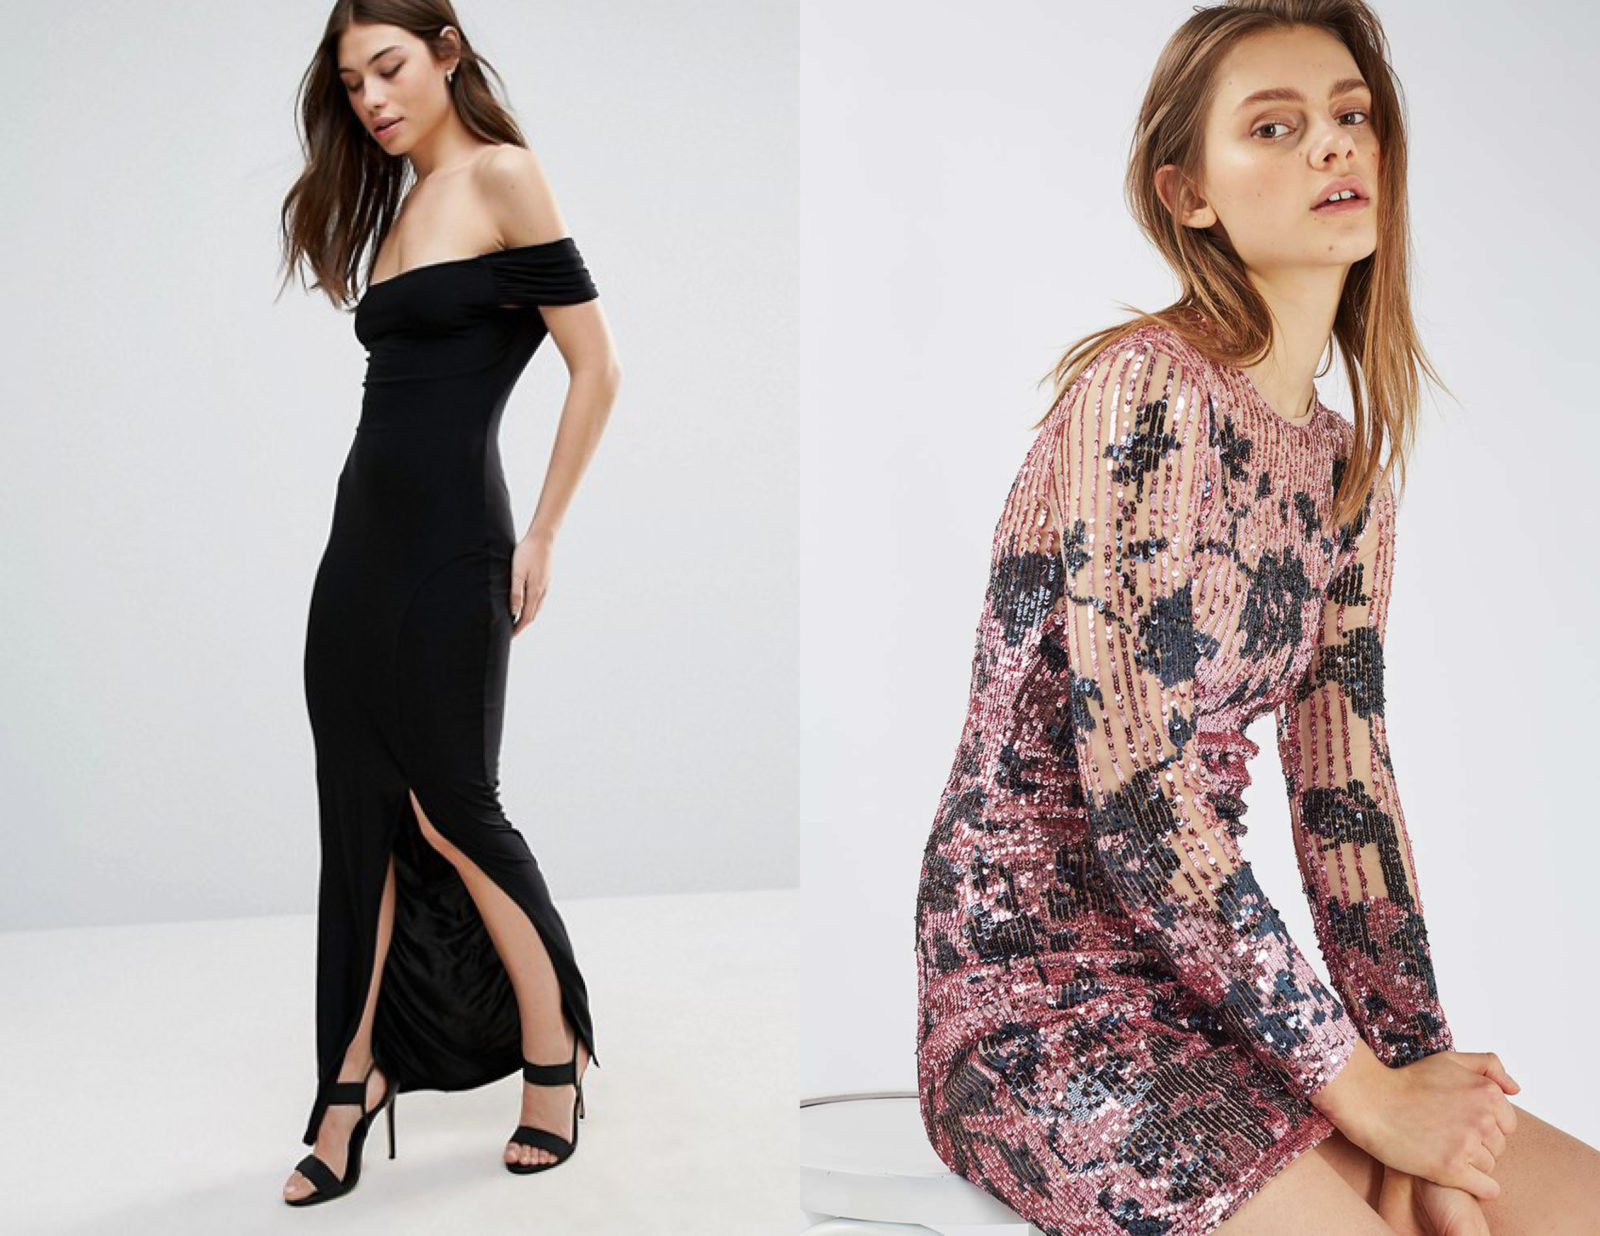 I rounded up five amazing holiday dresses for any budget. From sequins to velvet to over the top, there is one for every woman!